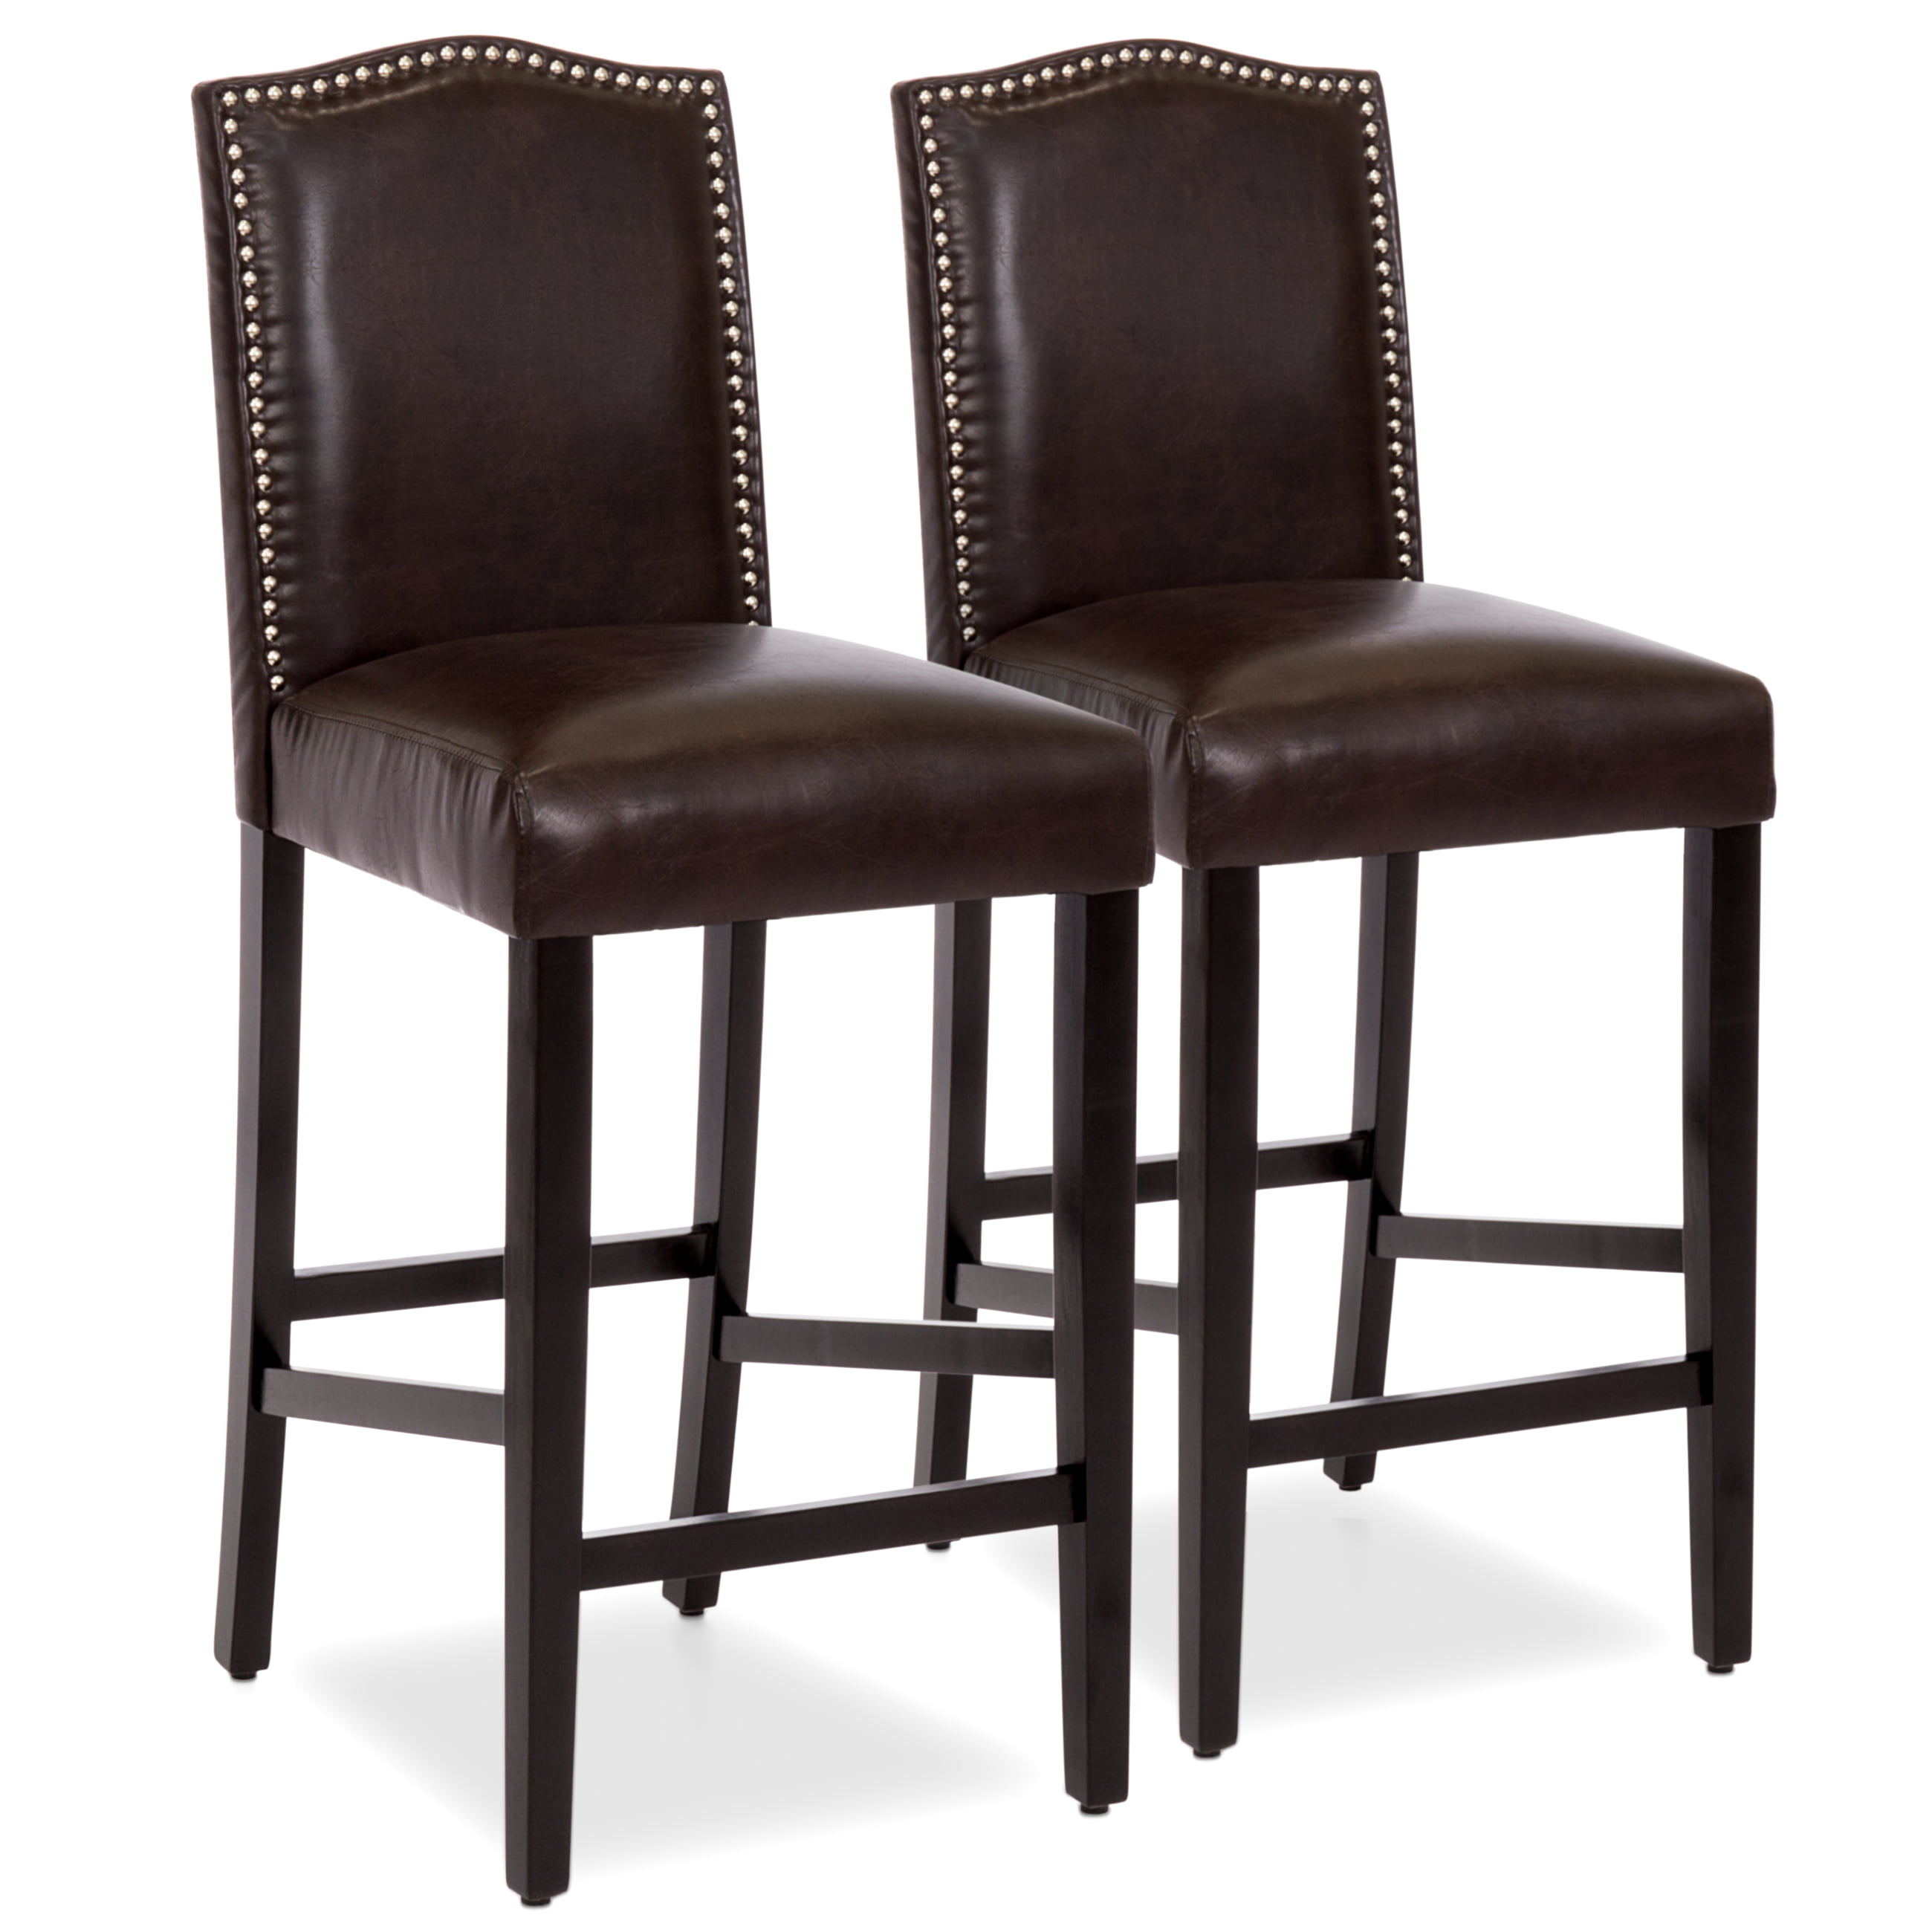 Leather Counter Chairs / Poundex F1016 Faux Leather Counter Height